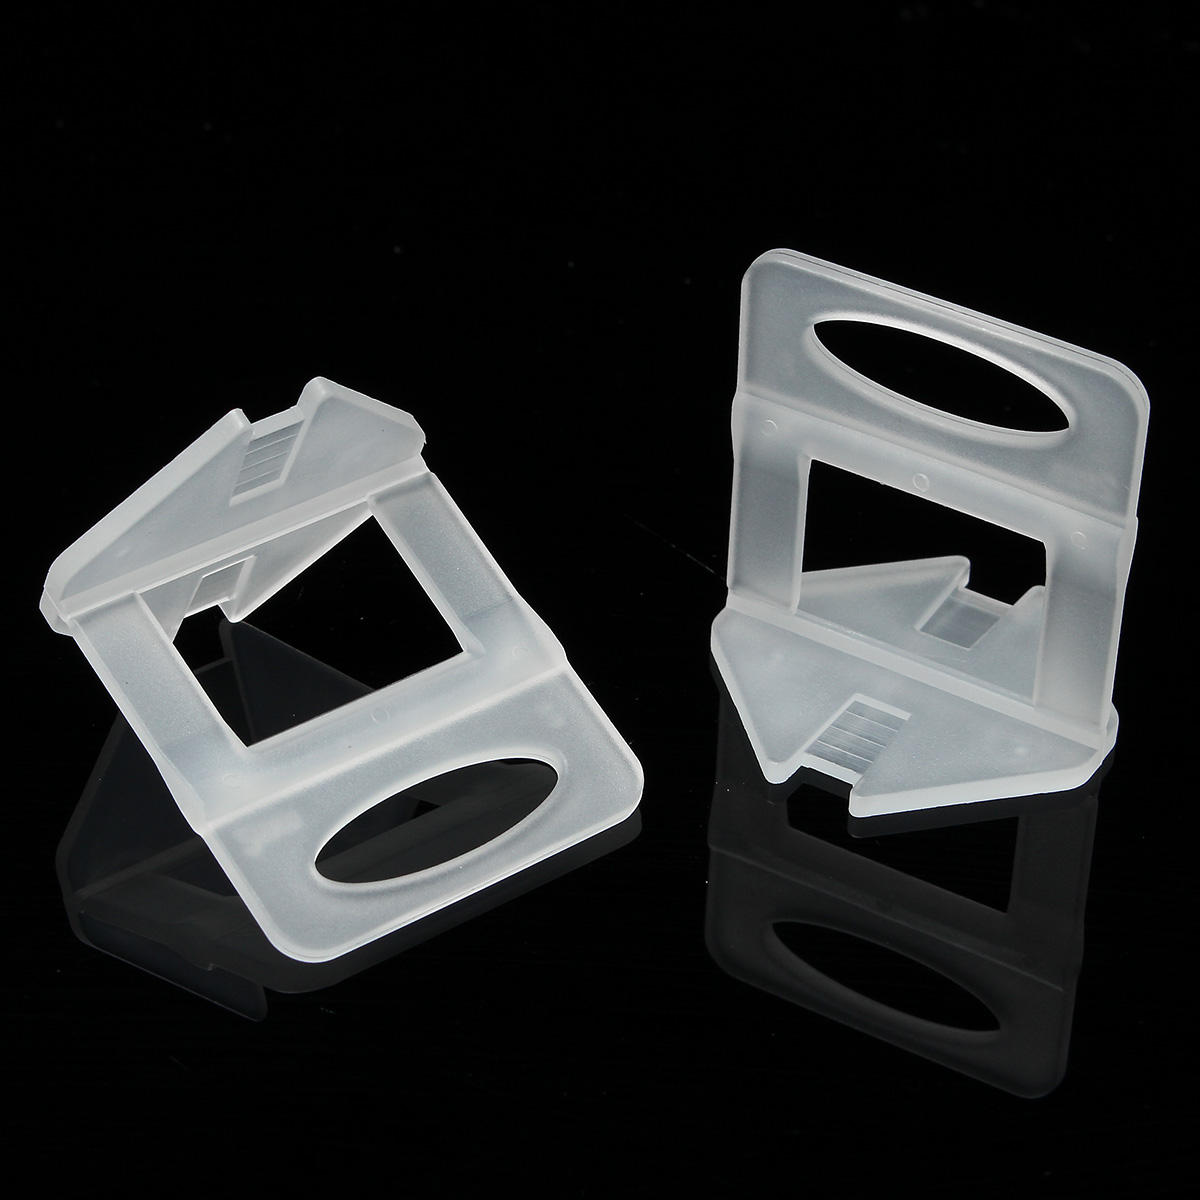 100Pcs 2mm Tile Leveling System Spacers Plastic For Home Floor